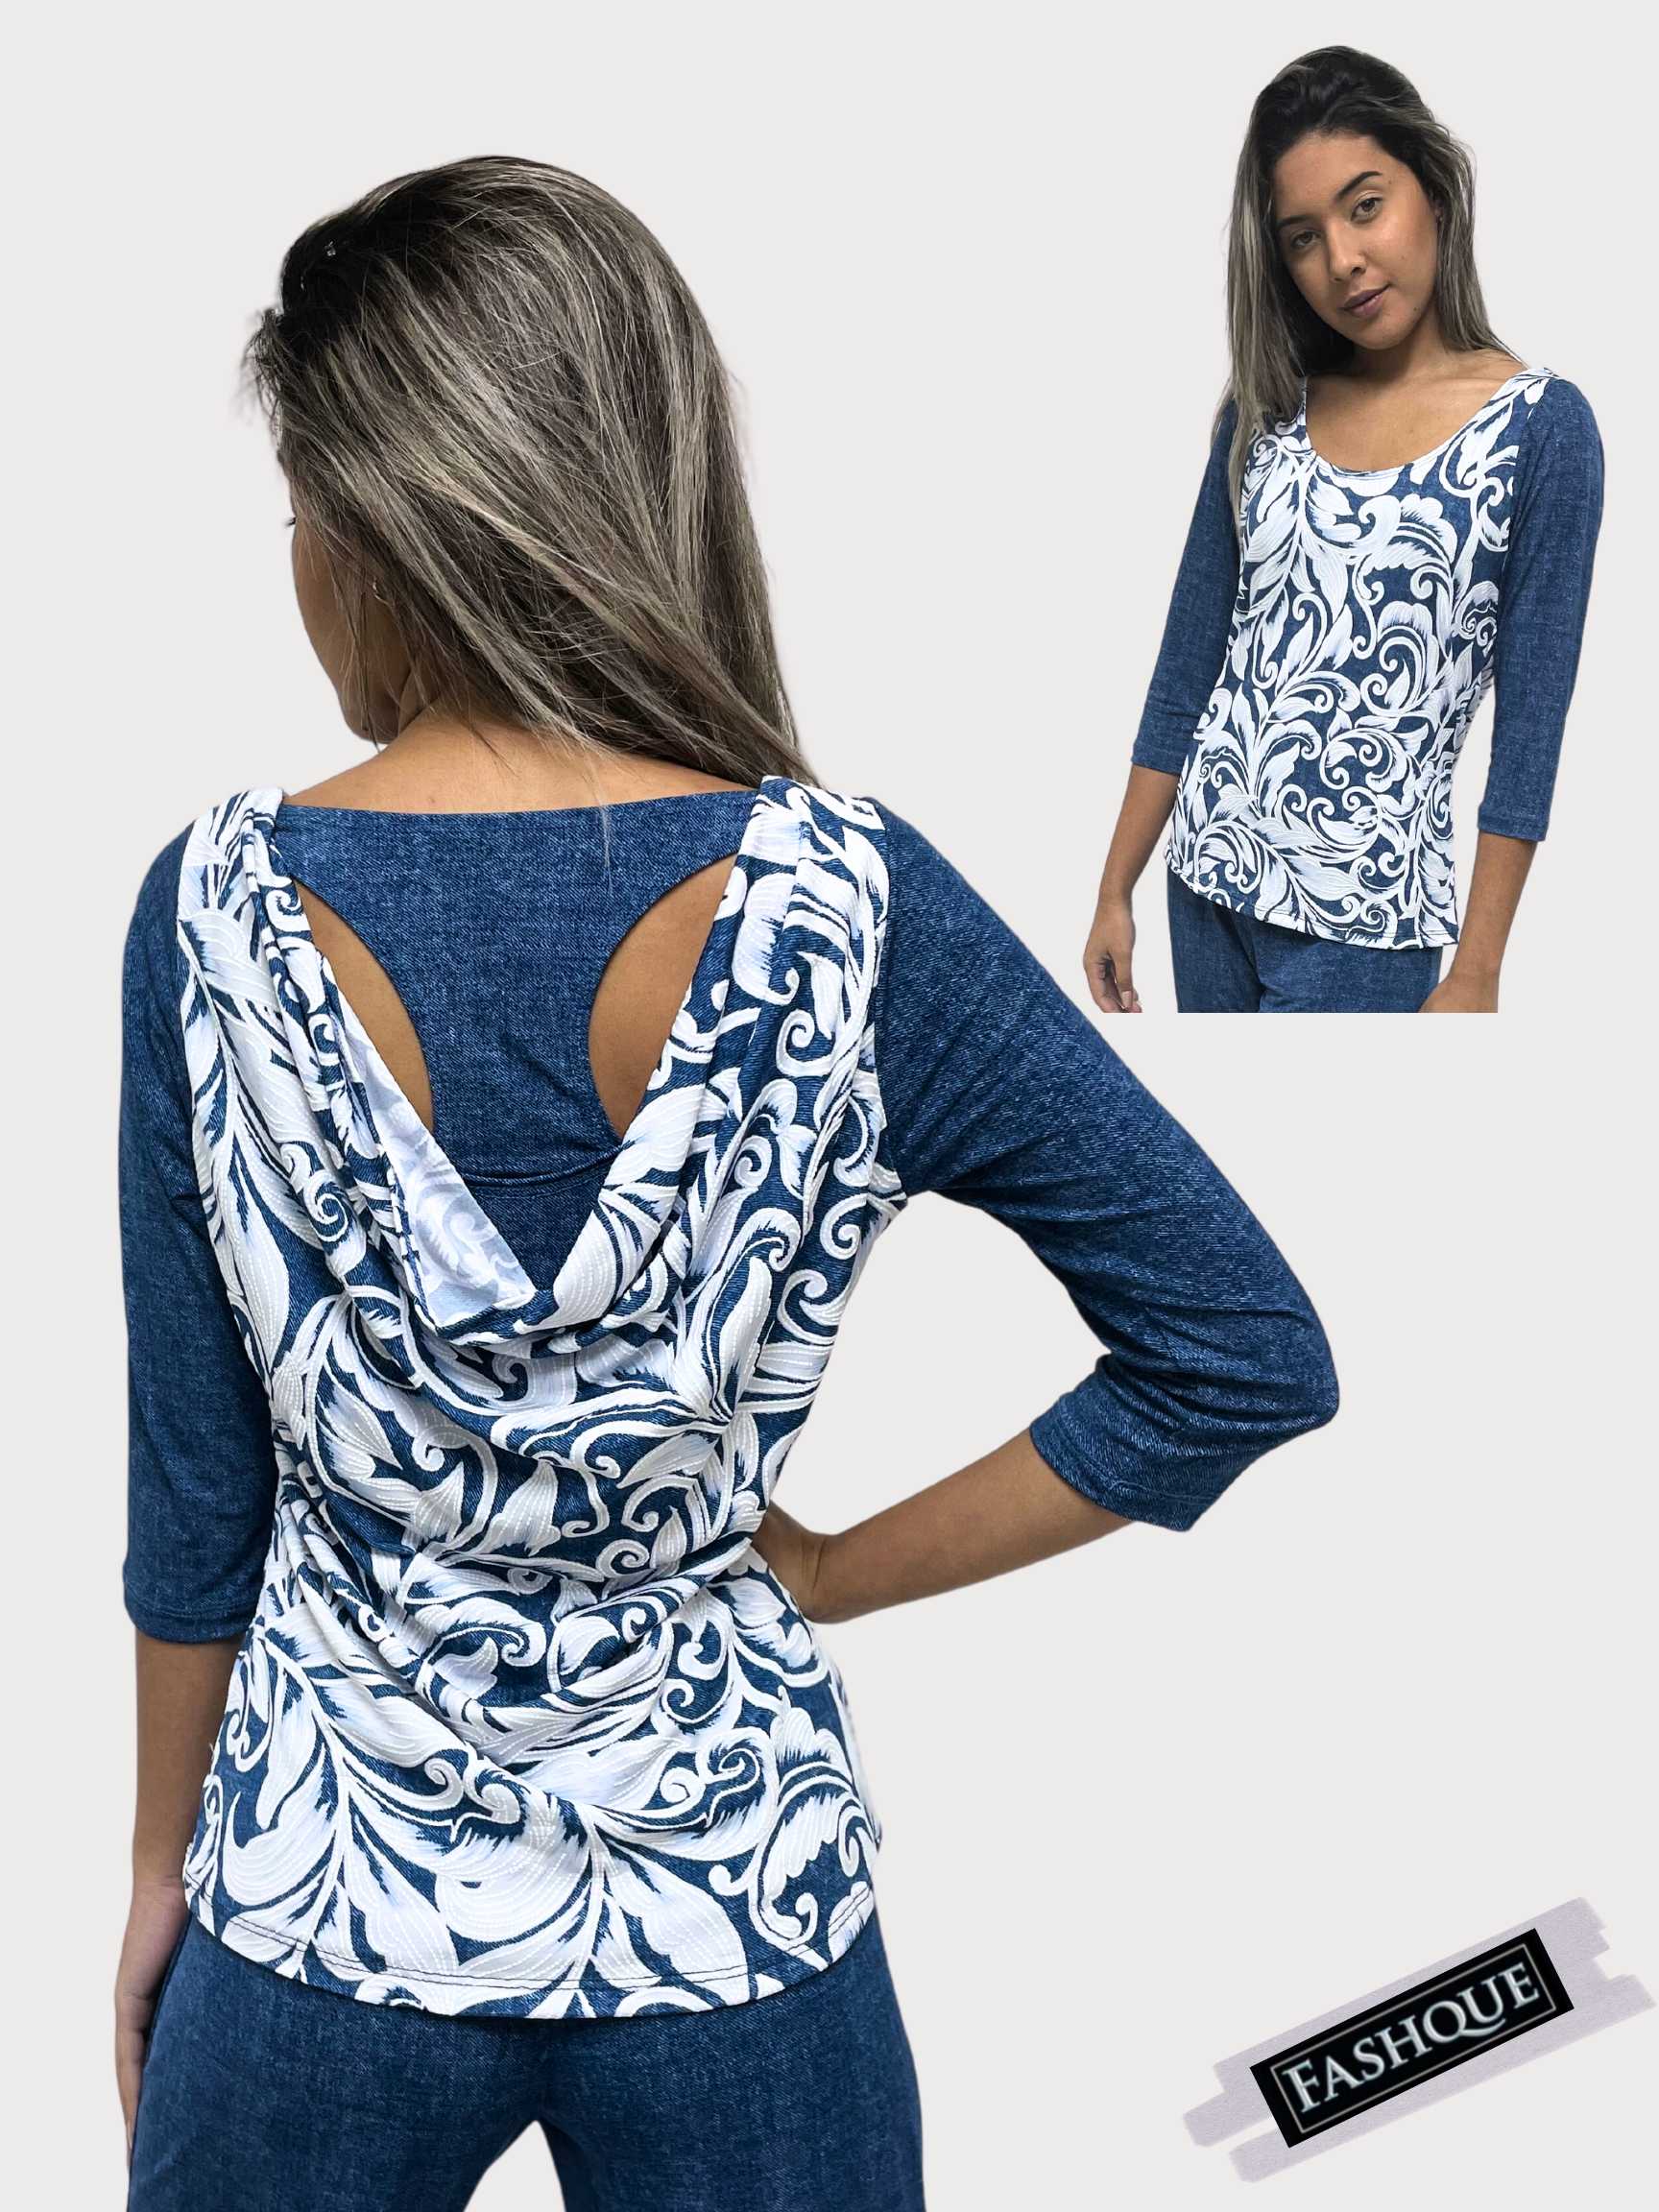 3/4 SLEEVE FLIRTY WOMENS TOP WITH RACERBACK TANK TOP - T658